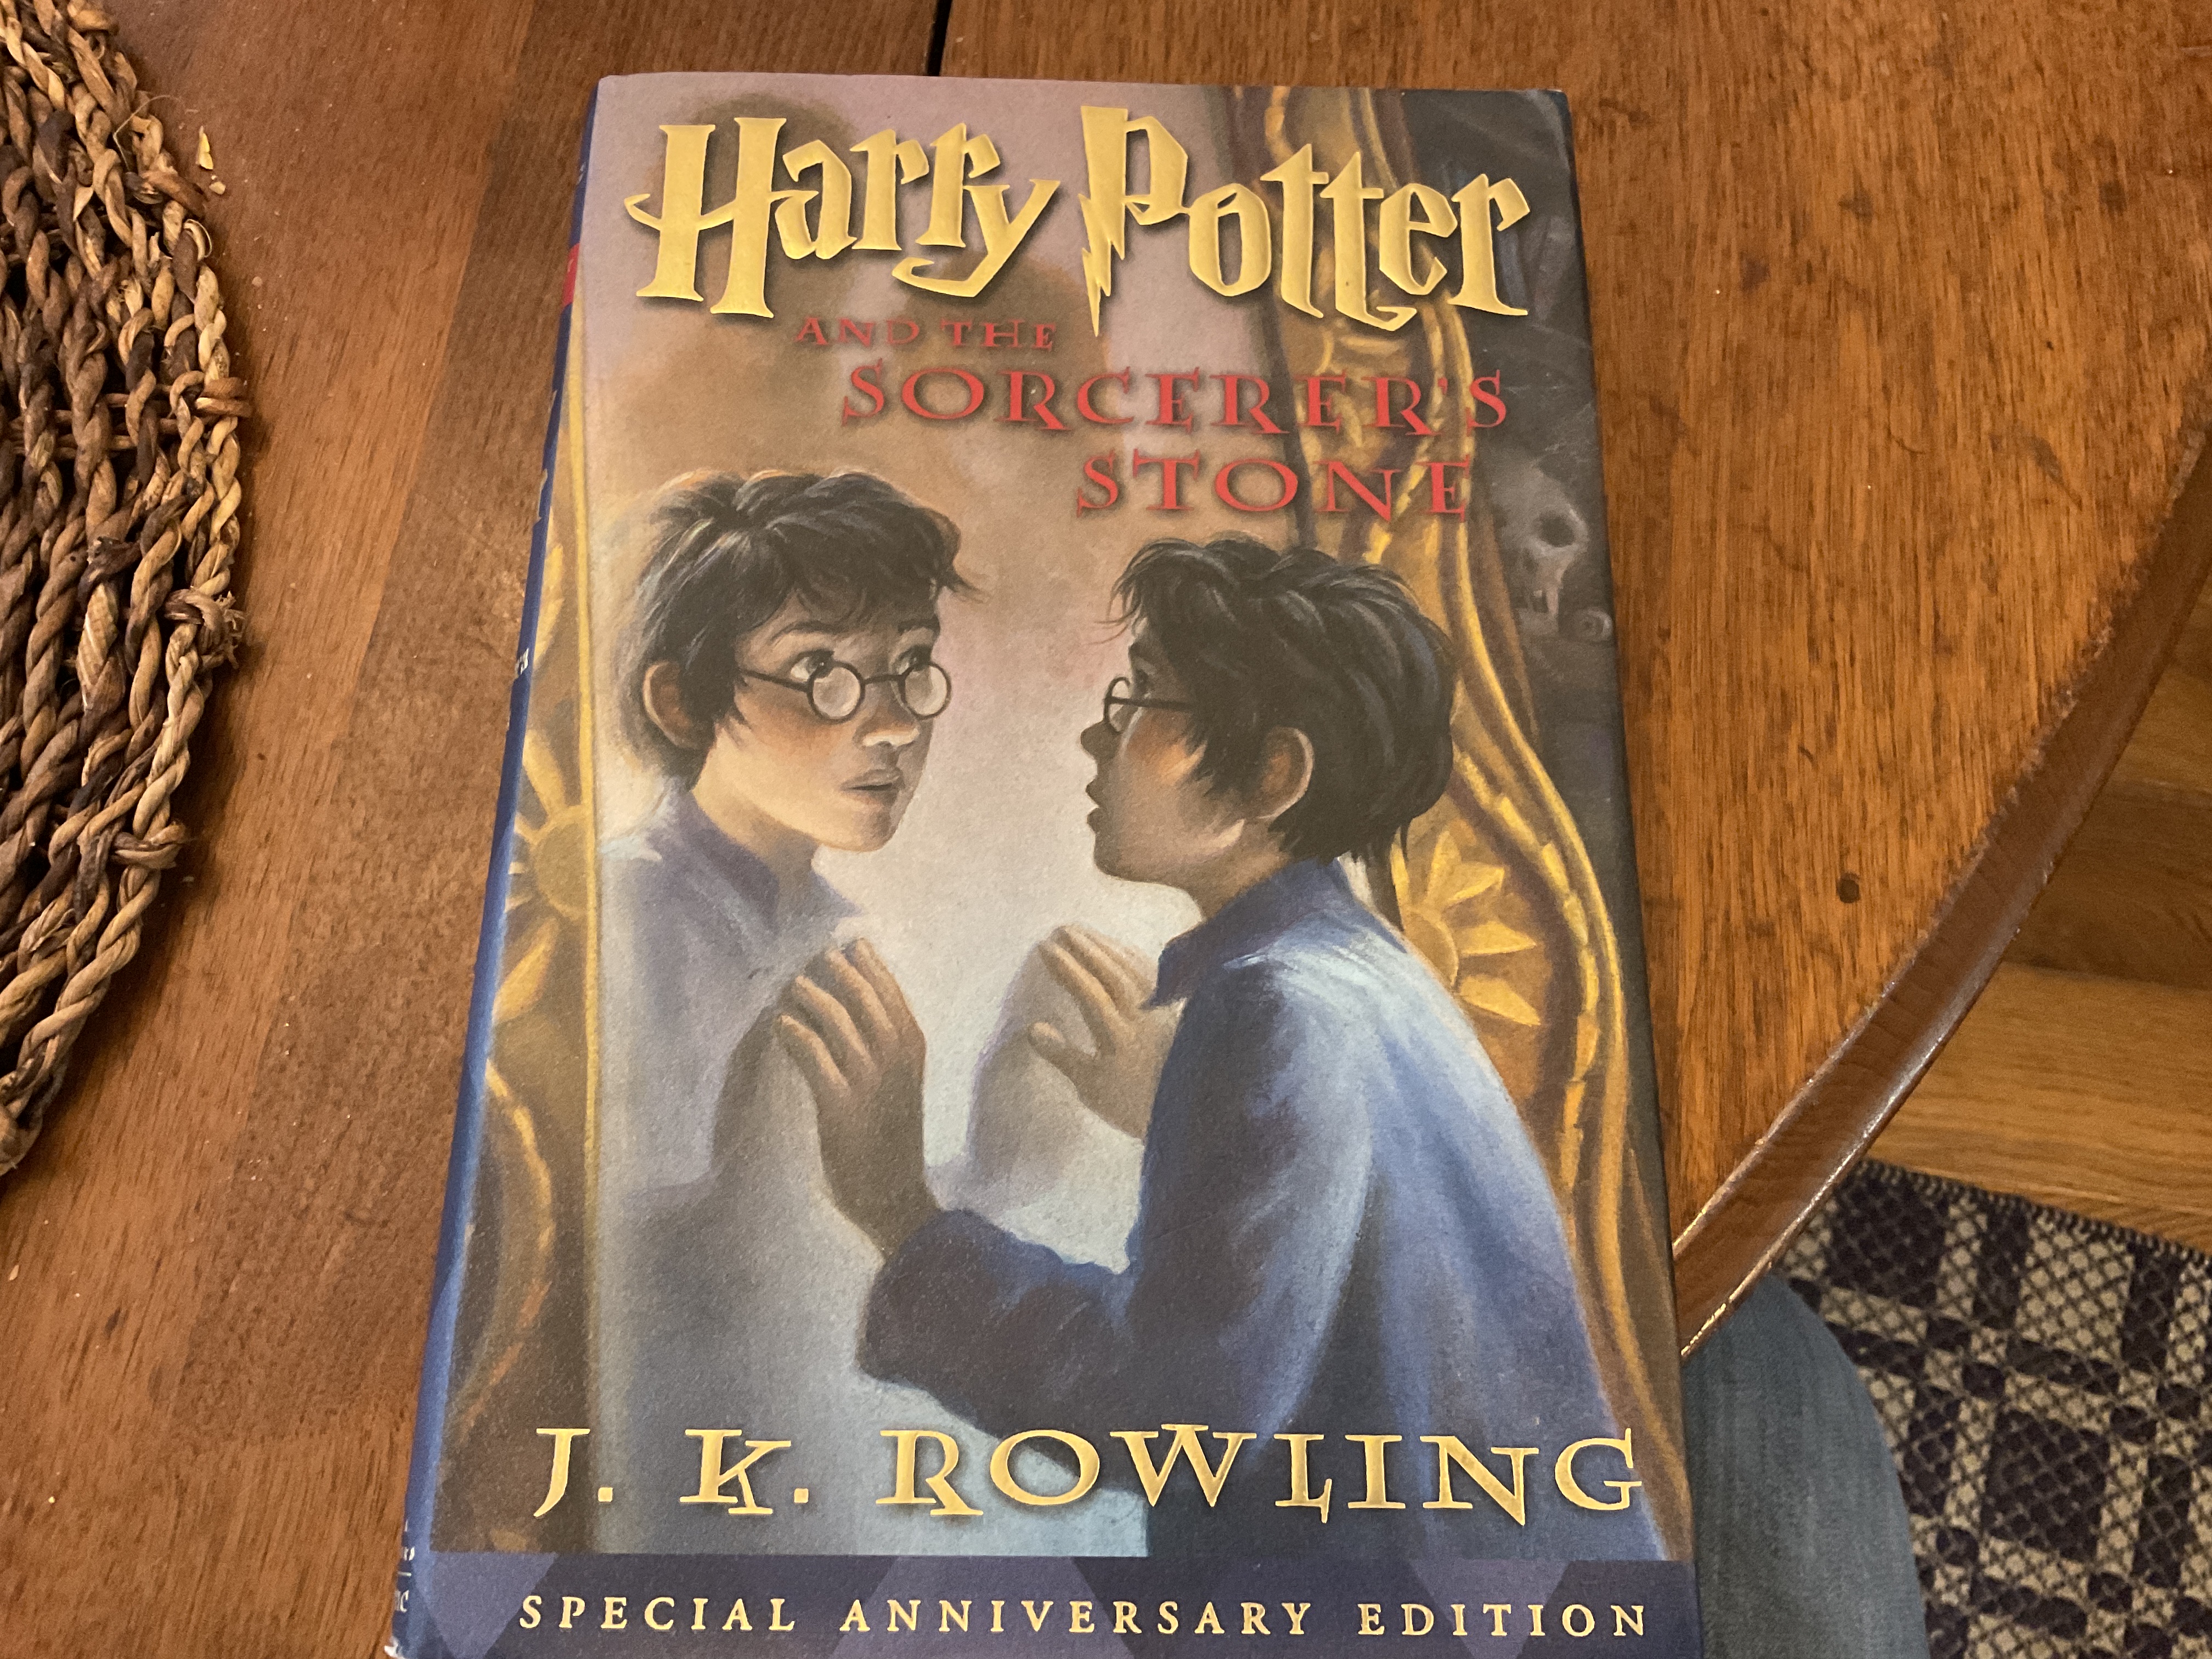 Harry Potter and the Sorcerer's Stone, 10th Anniversary Edition - J.K. Rowling